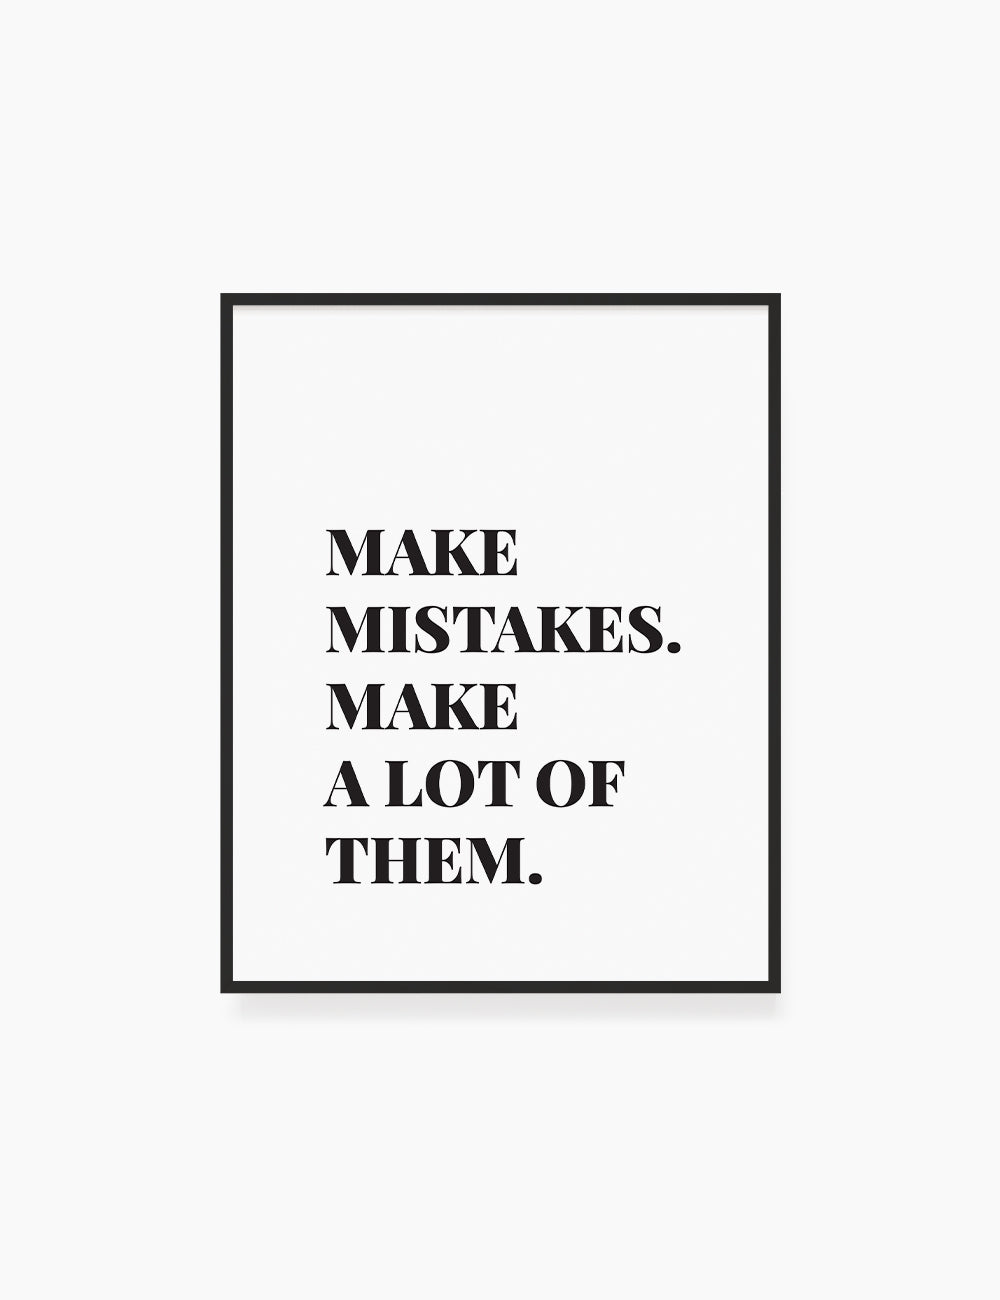 quotes about making mistakes